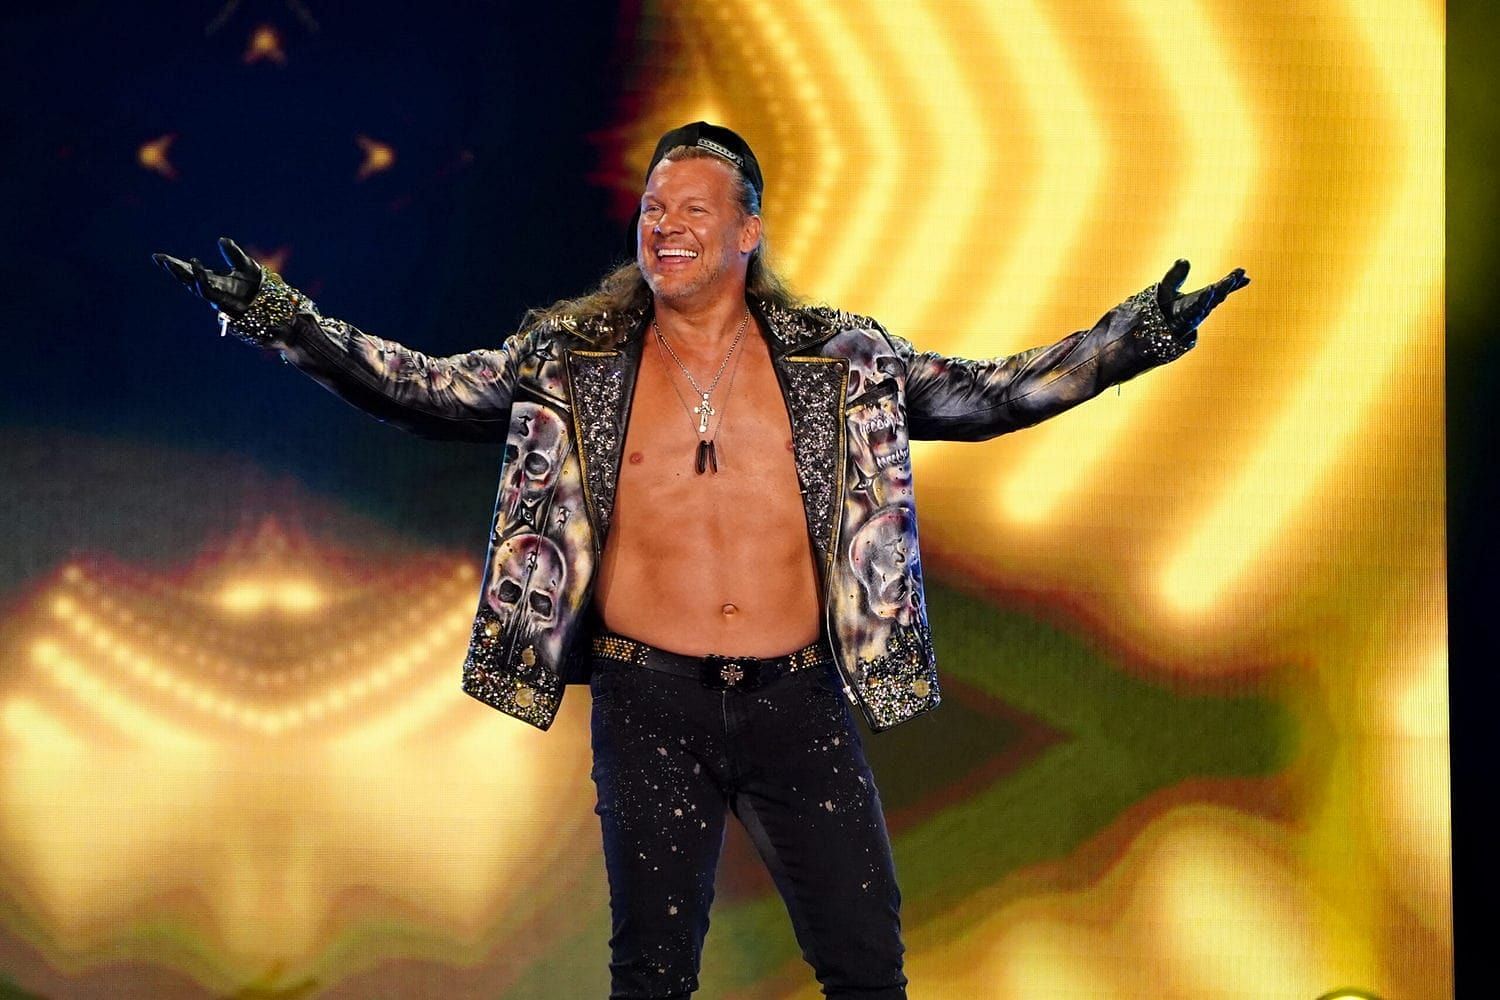 Chris Jericho currently leads the Jericho Appreciation Society (JAS).